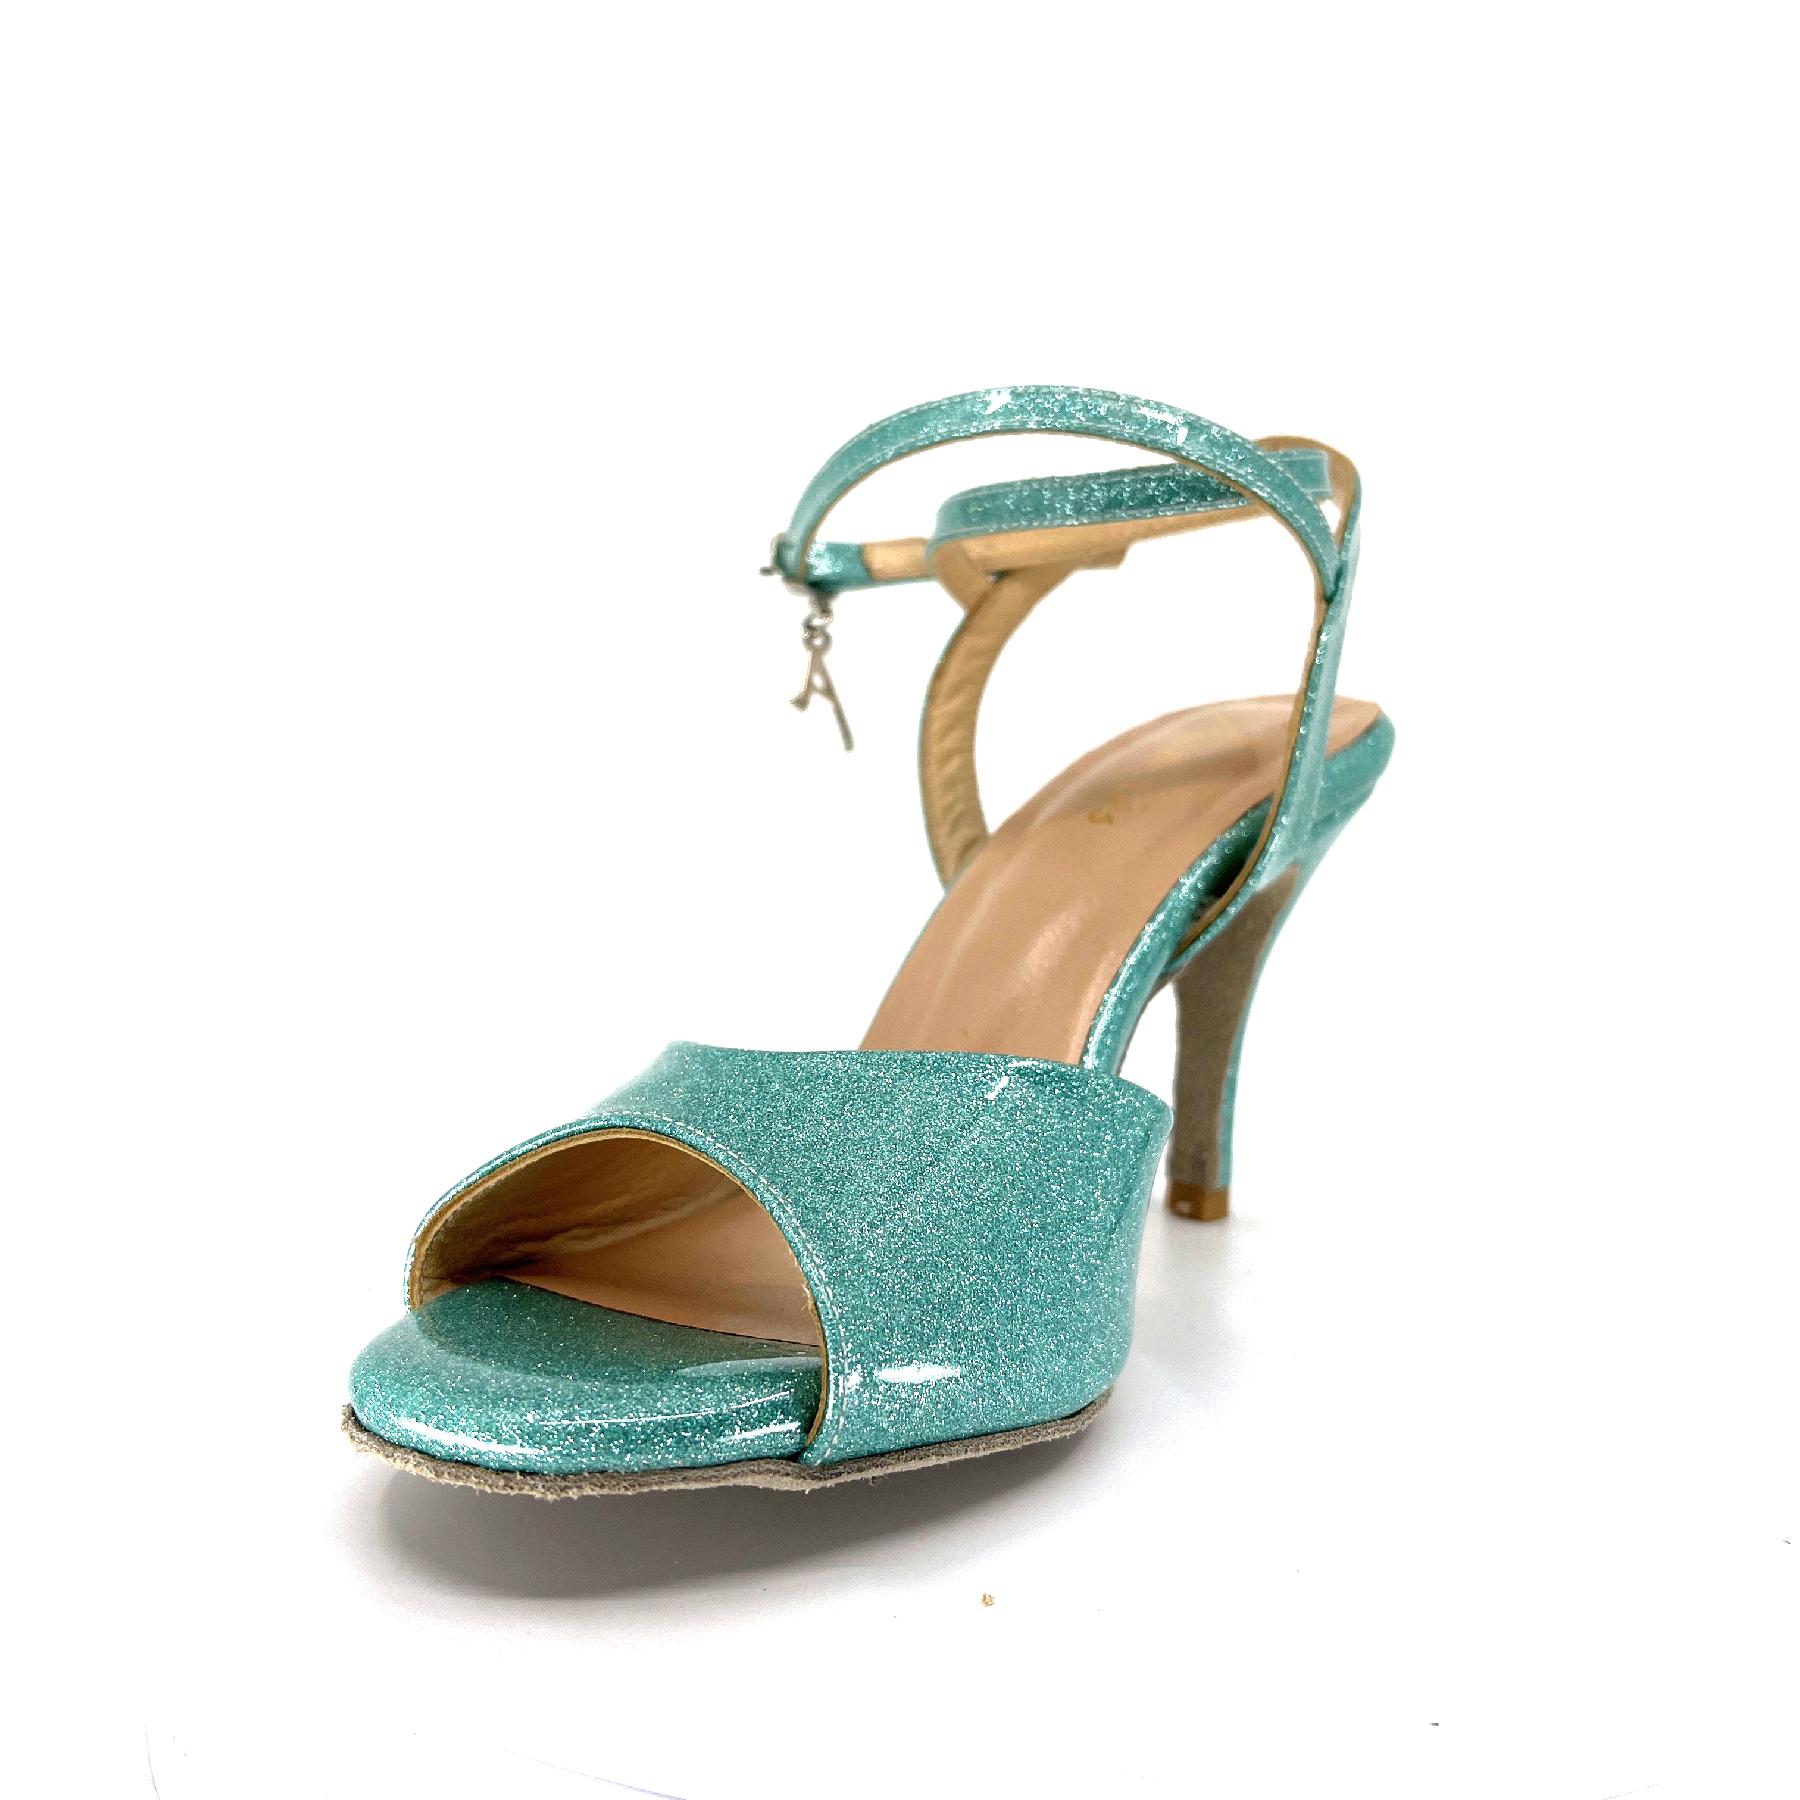 Leather heels Gianvito Rossi Turquoise size 36.5 EU in Leather - 40459489